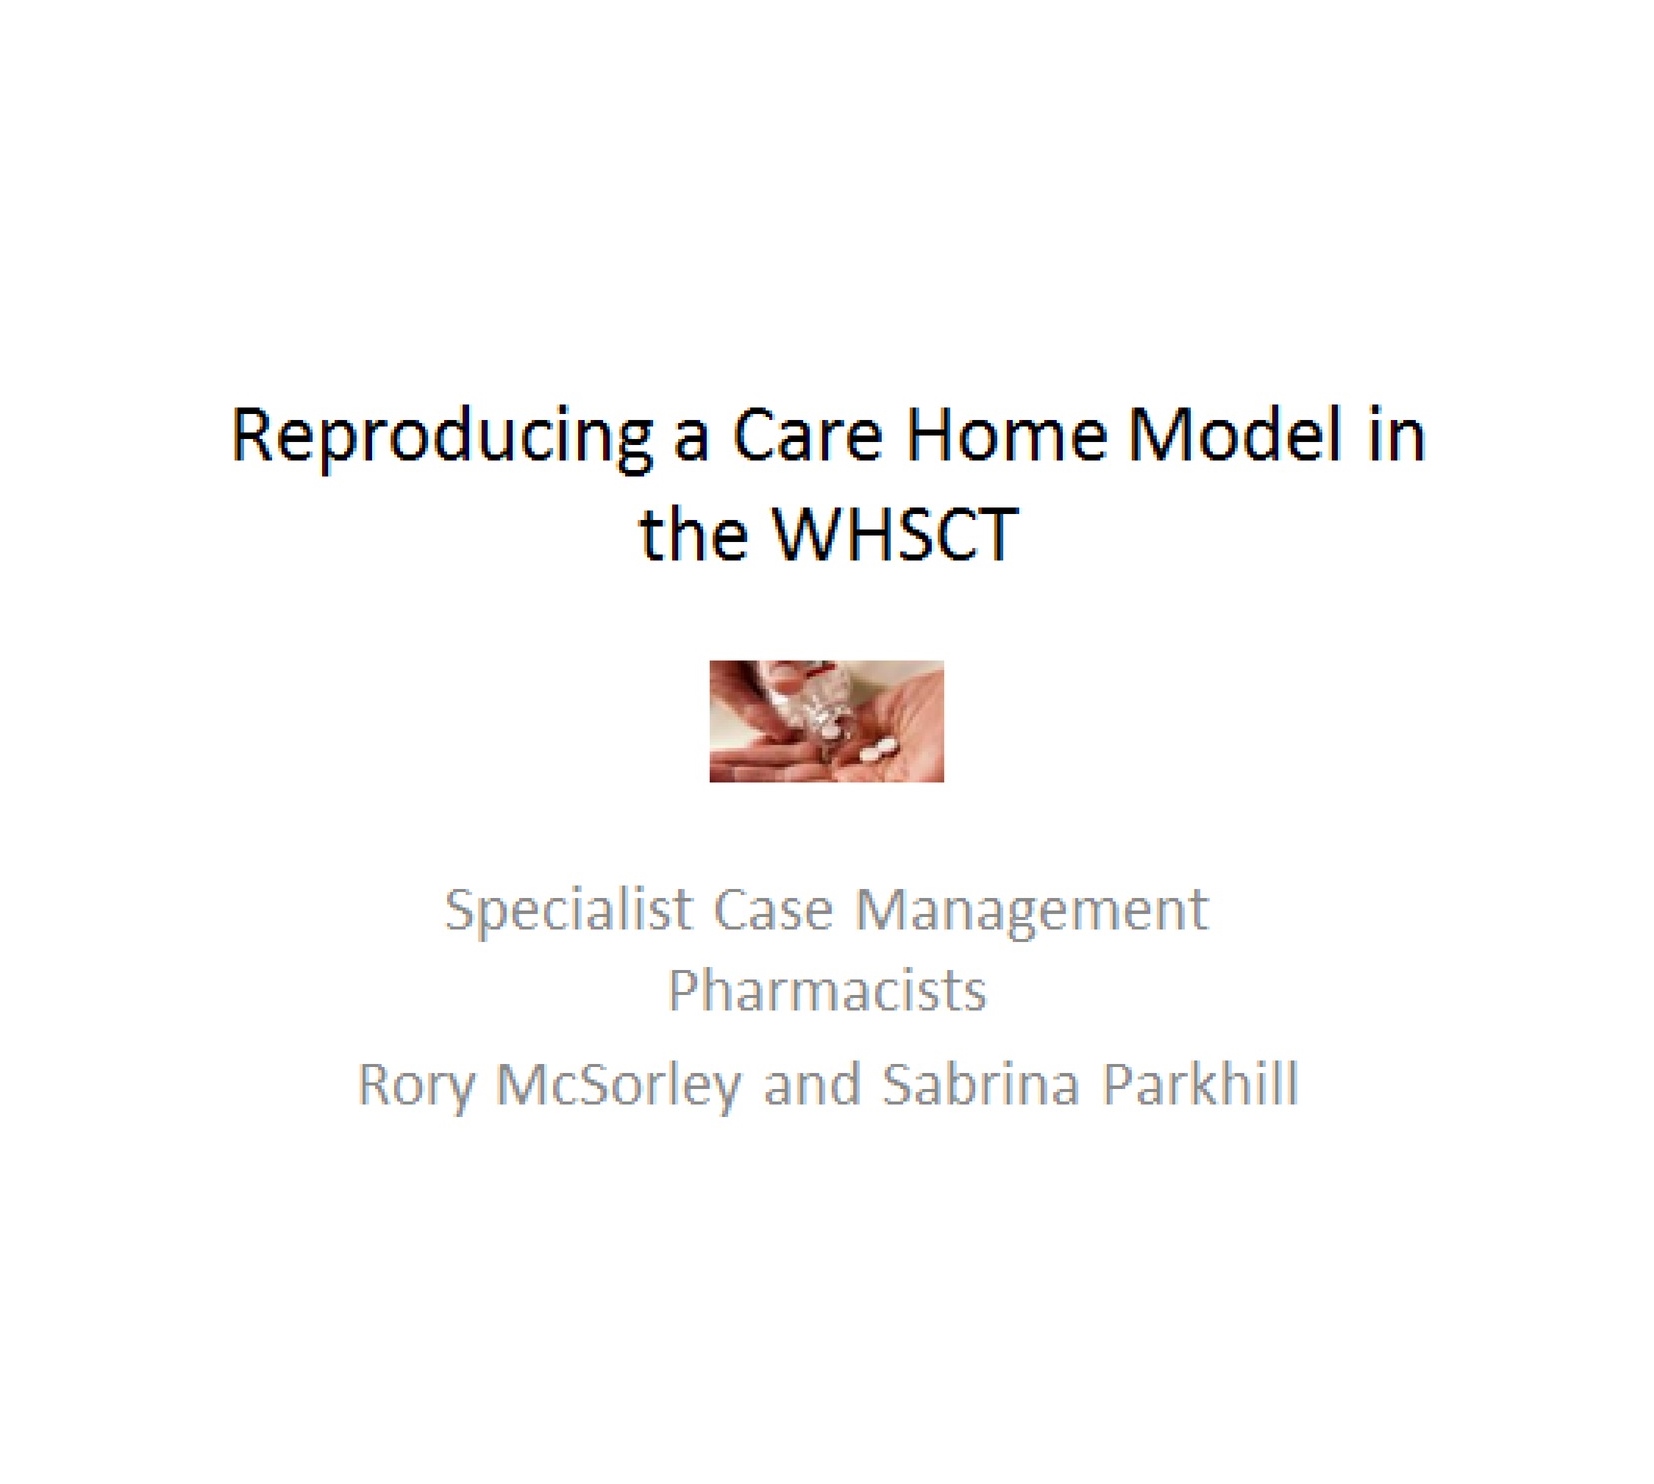 MOOP Think Tank: Reproducing a Care Home Model in the WHSCT